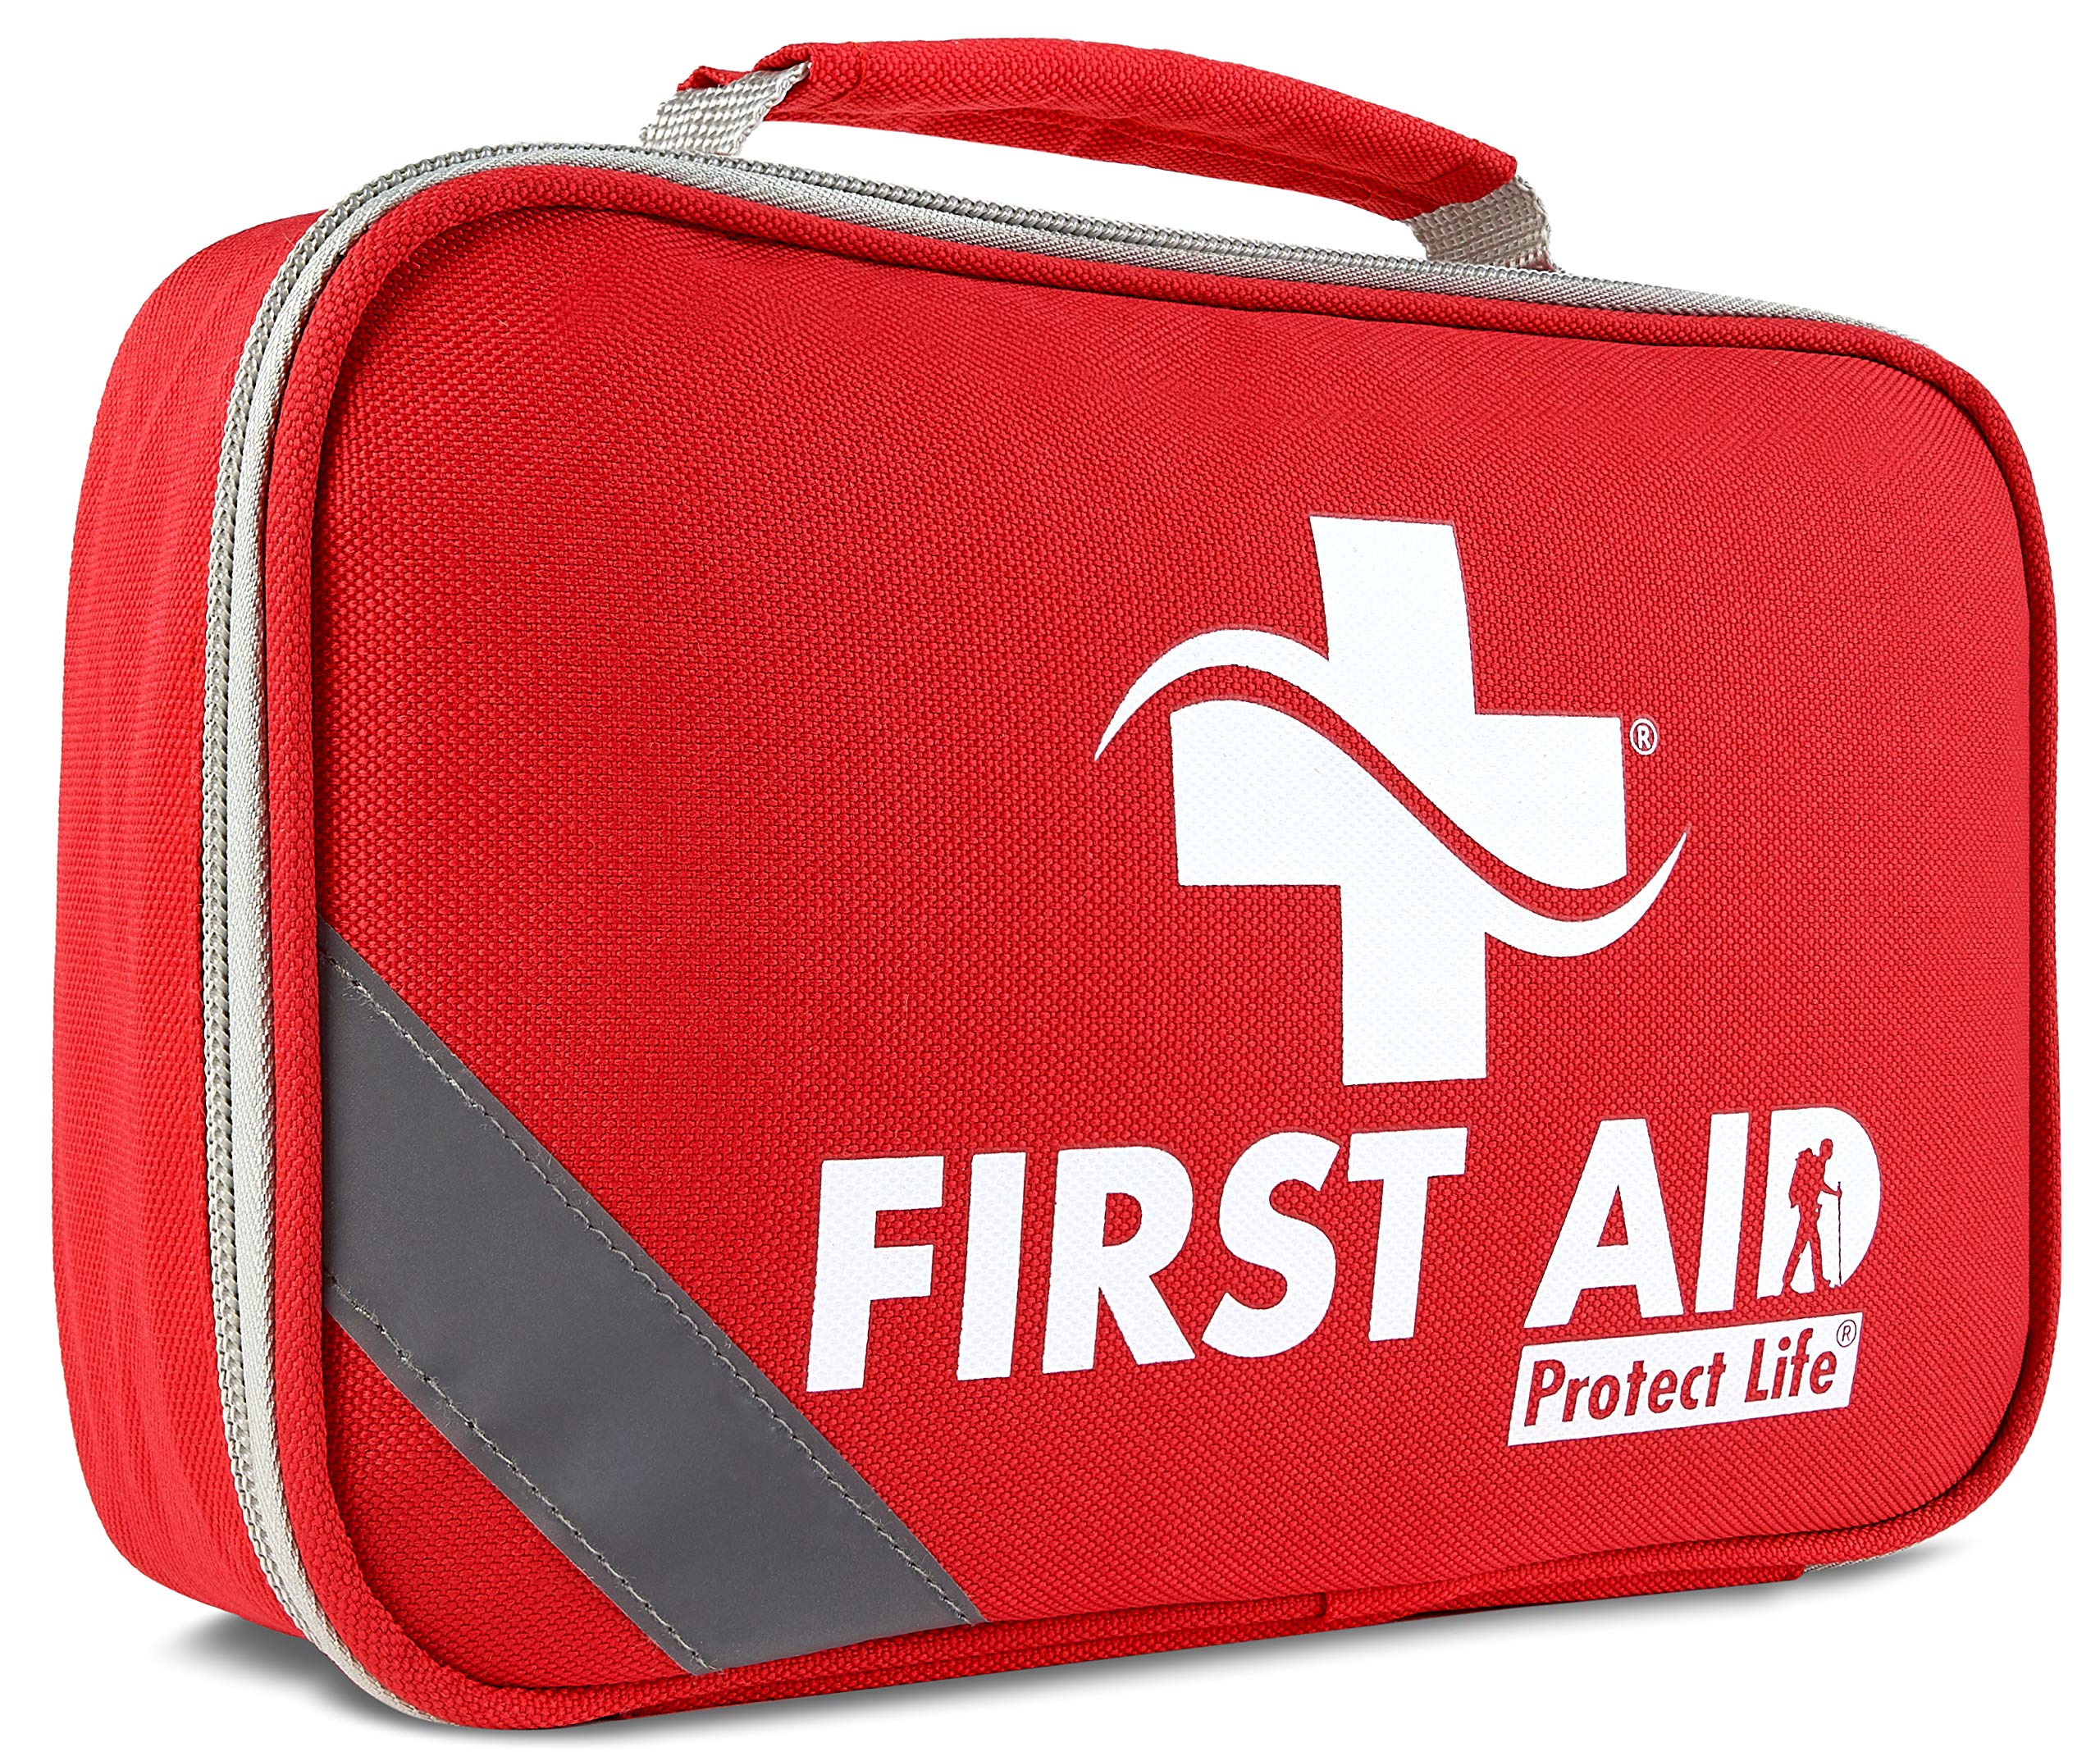 2-in-1 First Aid Kit for Car - 250 Piece - First Aid Kits for Businesses   Home First Aid Kit, Bonus Mini 1st Aid Kit, Emergency Supplies for Travel,  Workplace & More 250 Piece Set